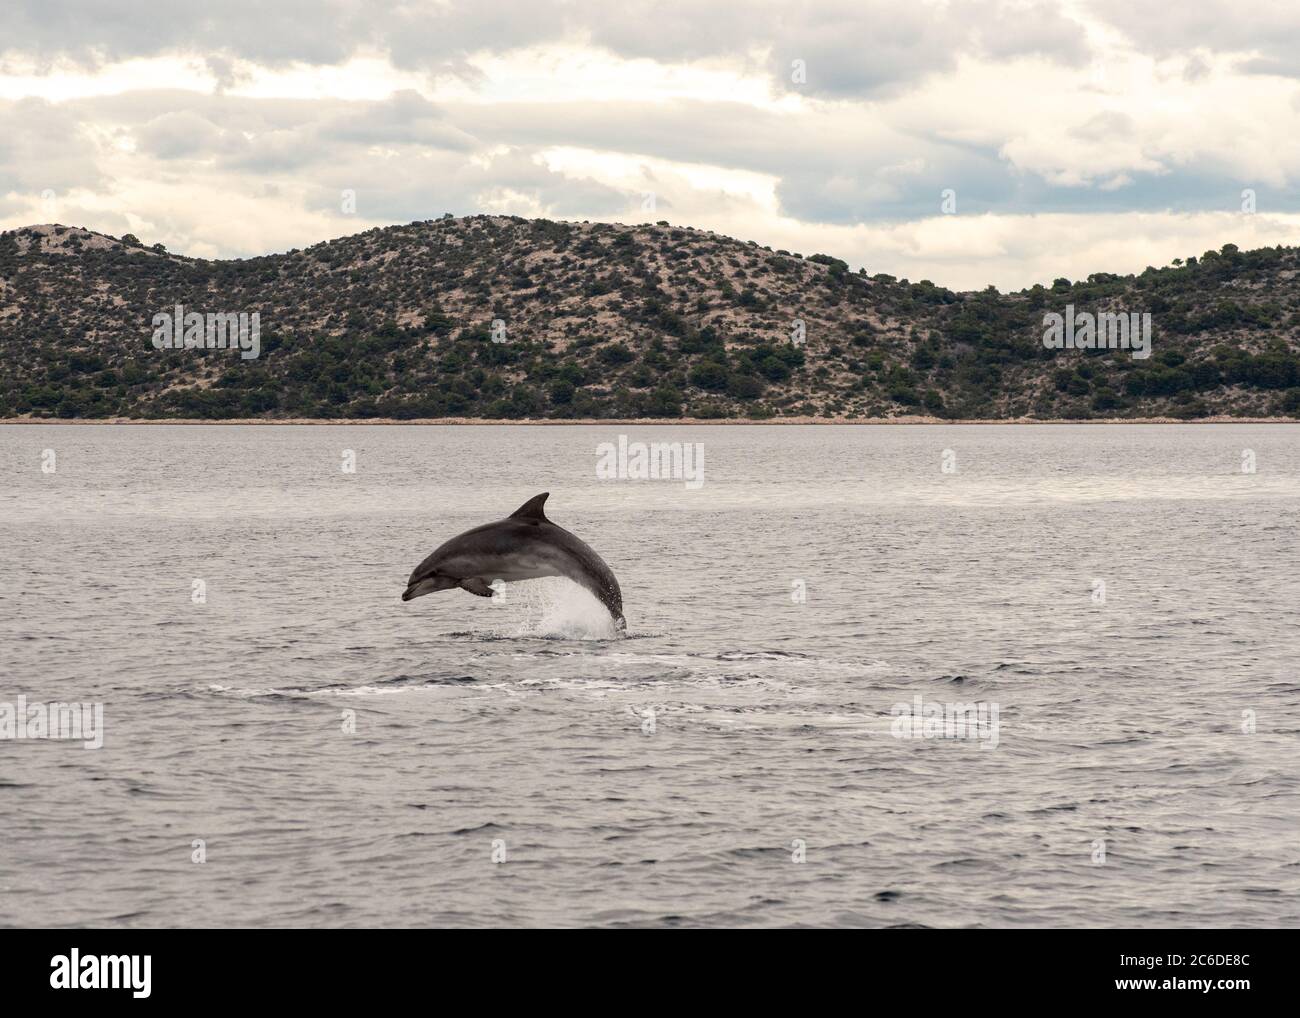 Dolphin in the wild Stock Photo